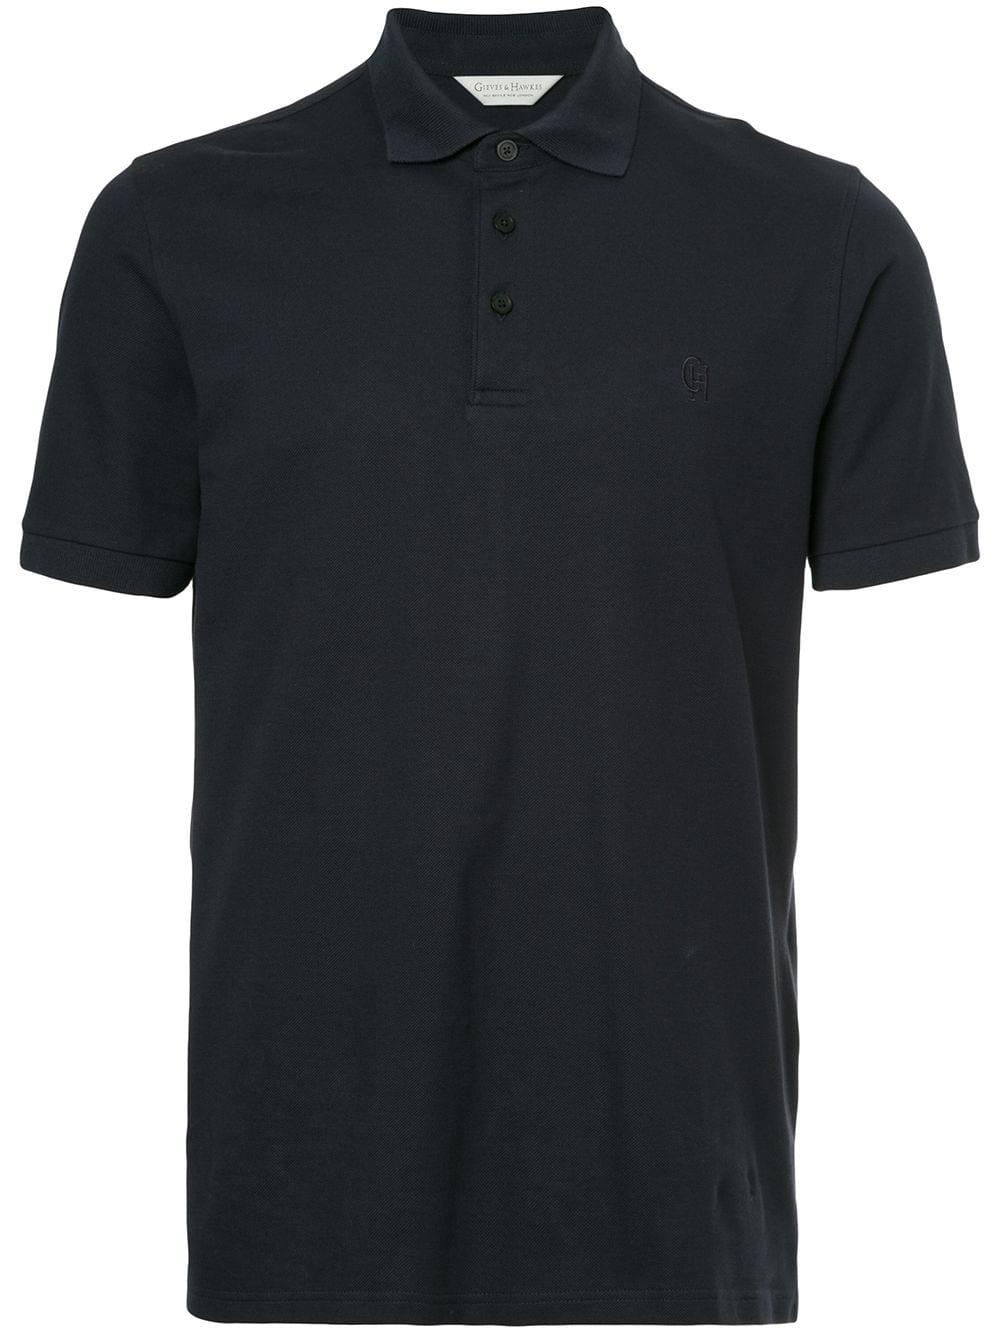 Gieves & Hawkes Cotton Classic Polo Top in Blue for Men - Lyst